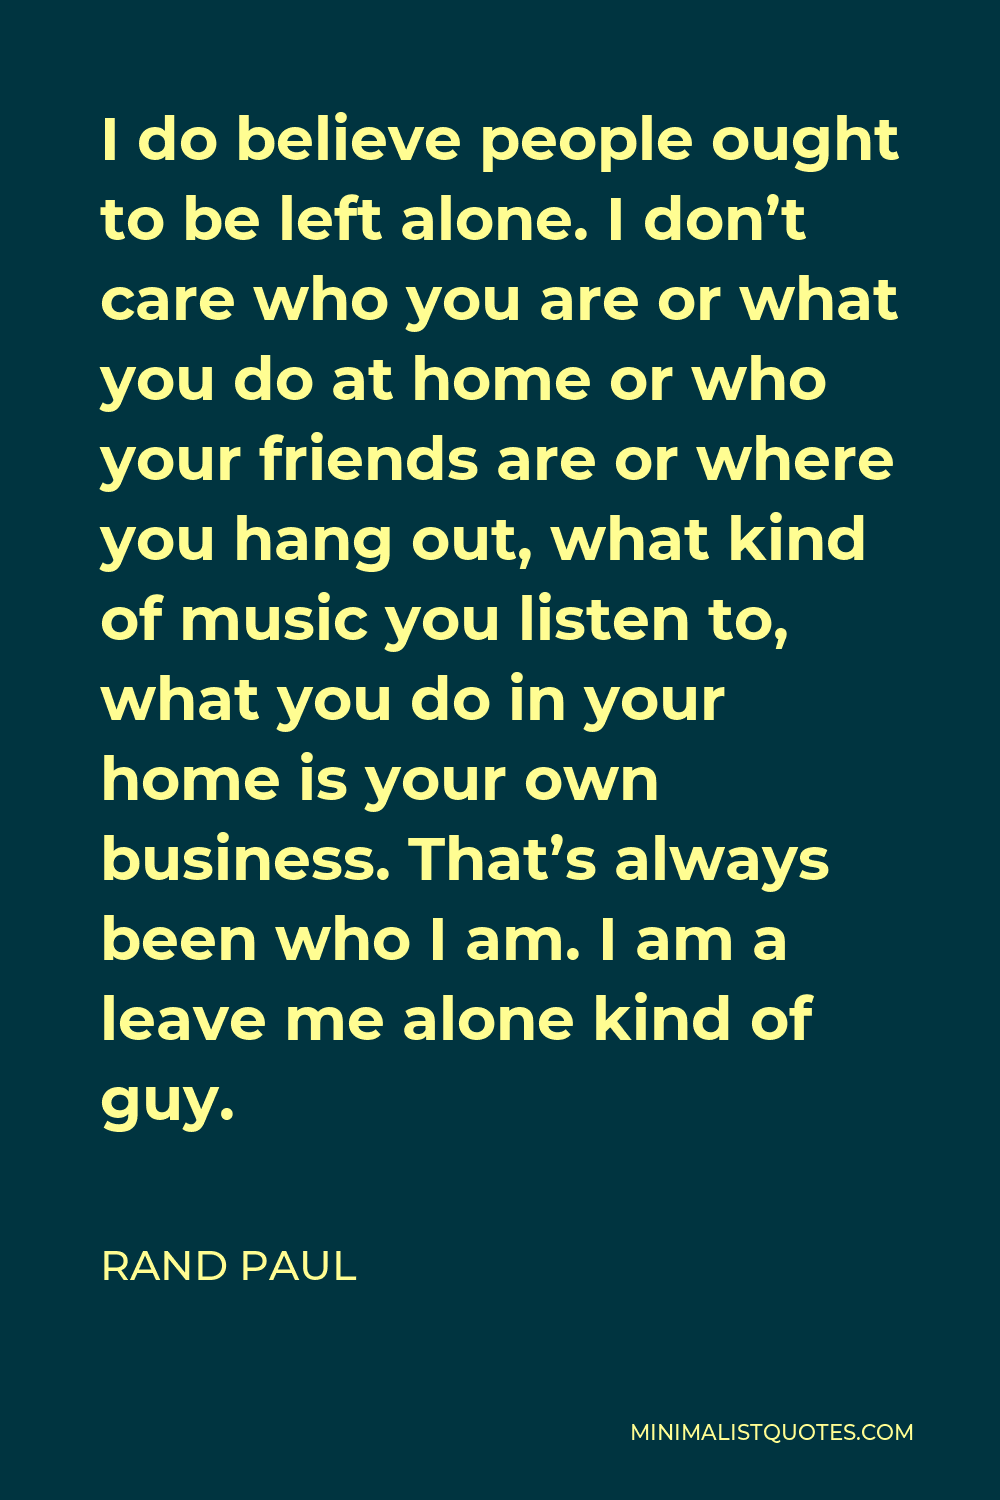 Rand Paul Quote - I do believe people ought to be left alone. I don’t care who you are or what you do at home or who your friends are or where you hang out, what kind of music you listen to, what you do in your home is your own business. That’s always been who I am. I am a leave me alone kind of guy.